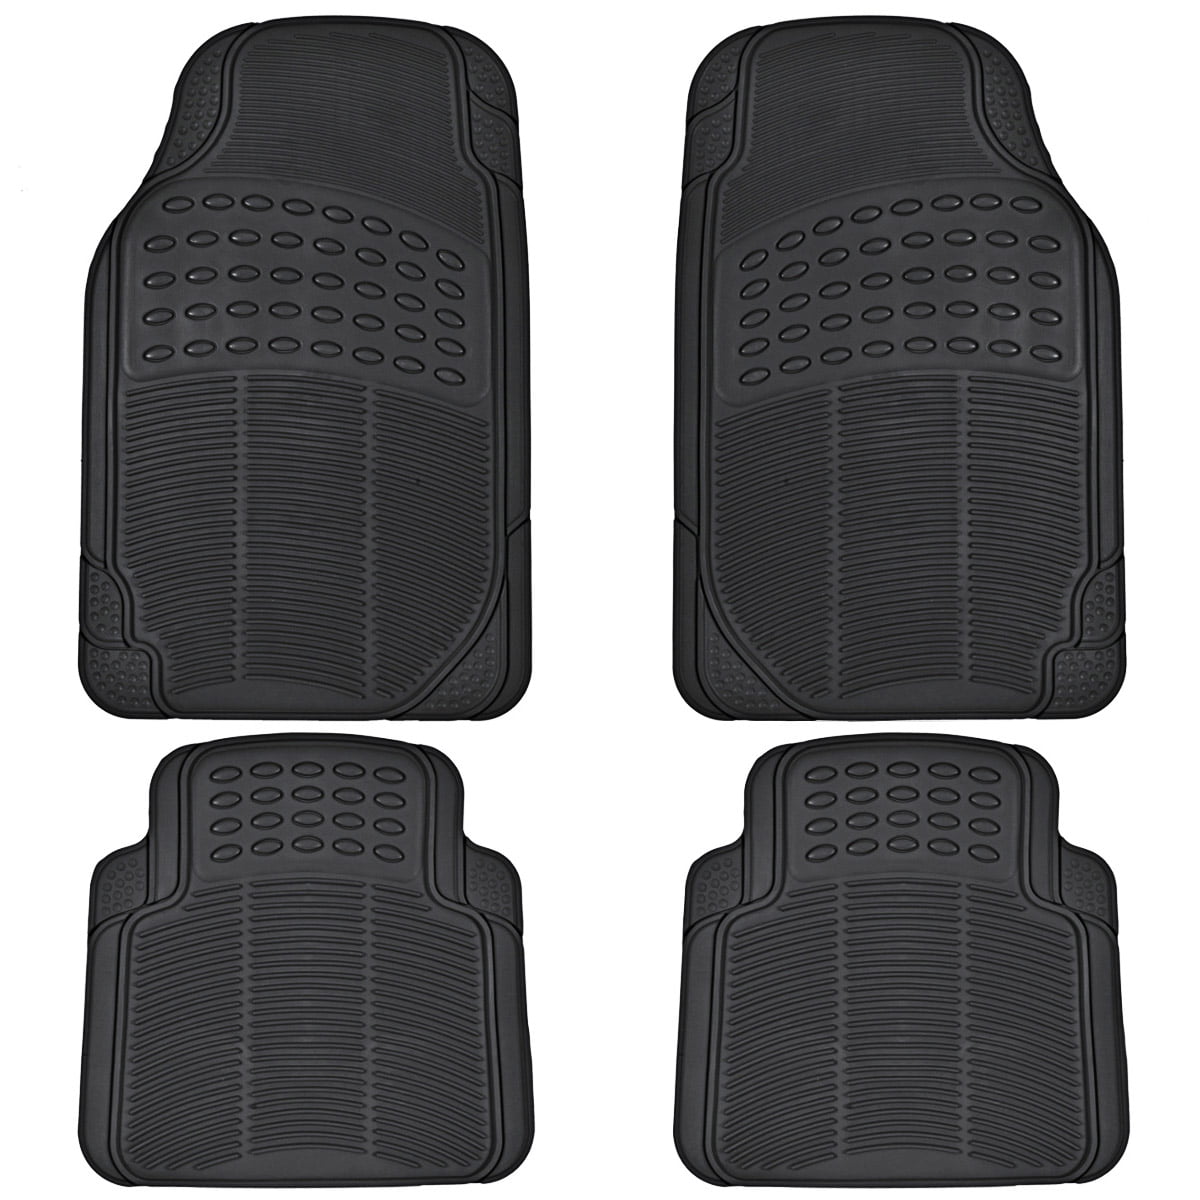 Red/Black Two Tone Seat Cover Set and Heavy Duty Rubber Floor Mats Car Truck SUV